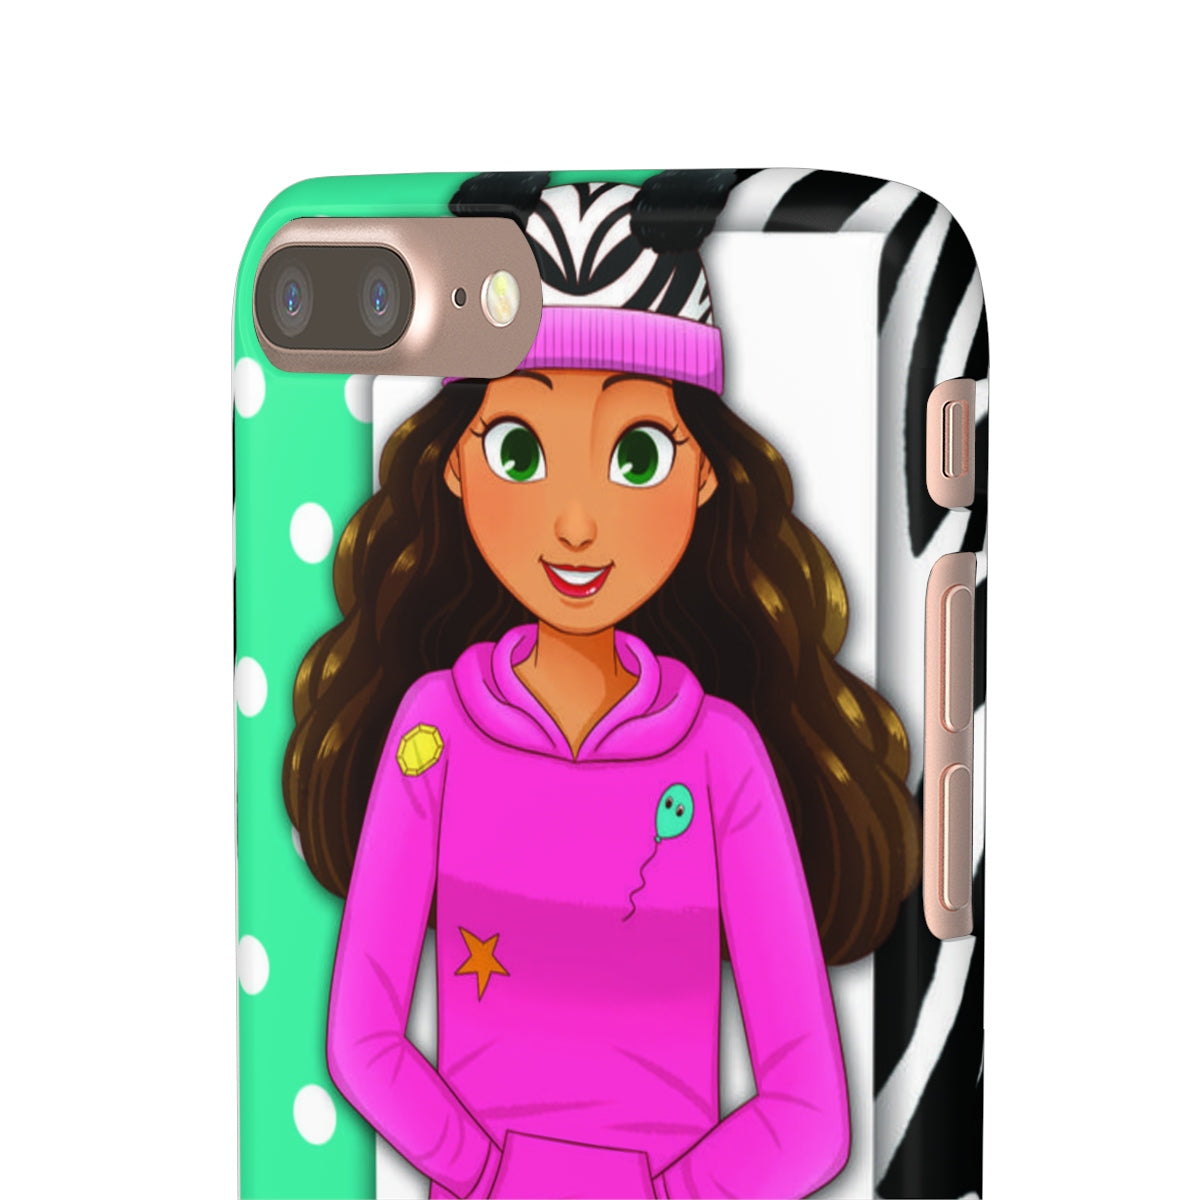 MISS CAMILA iPhone Snap Cases